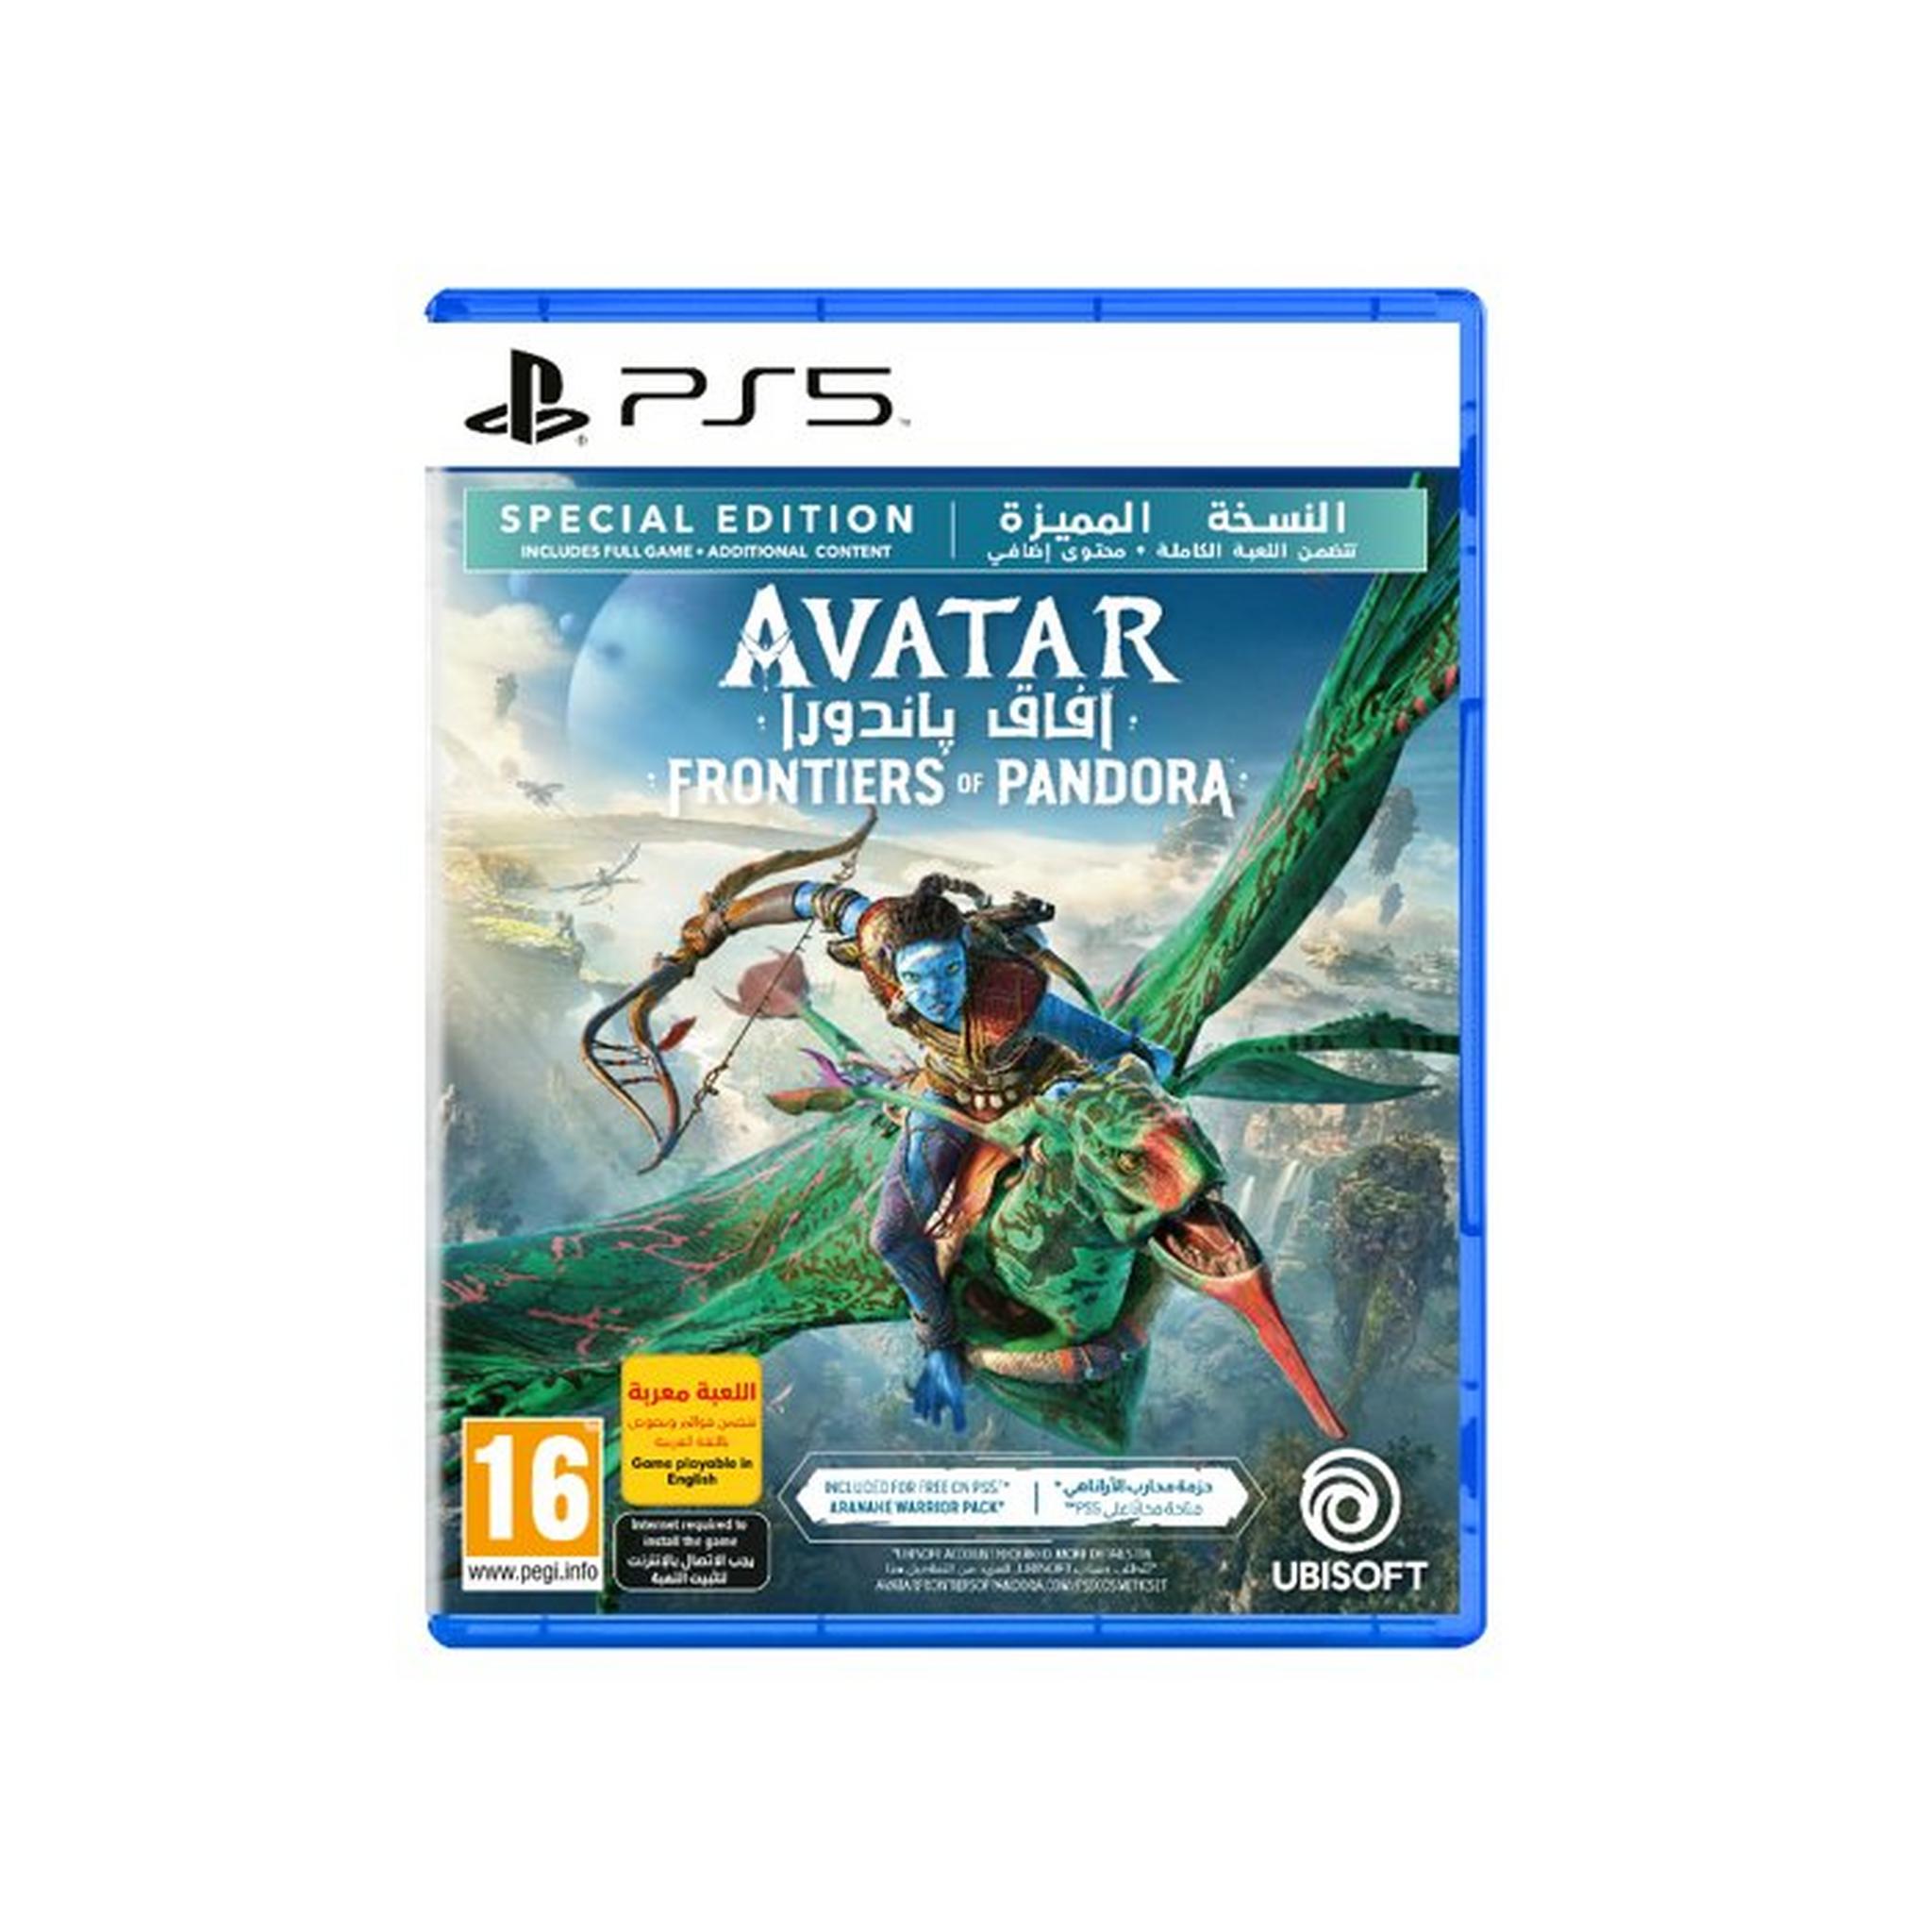 Avatar Frontiers of Pandora Game Special Edition for PlayStation 5